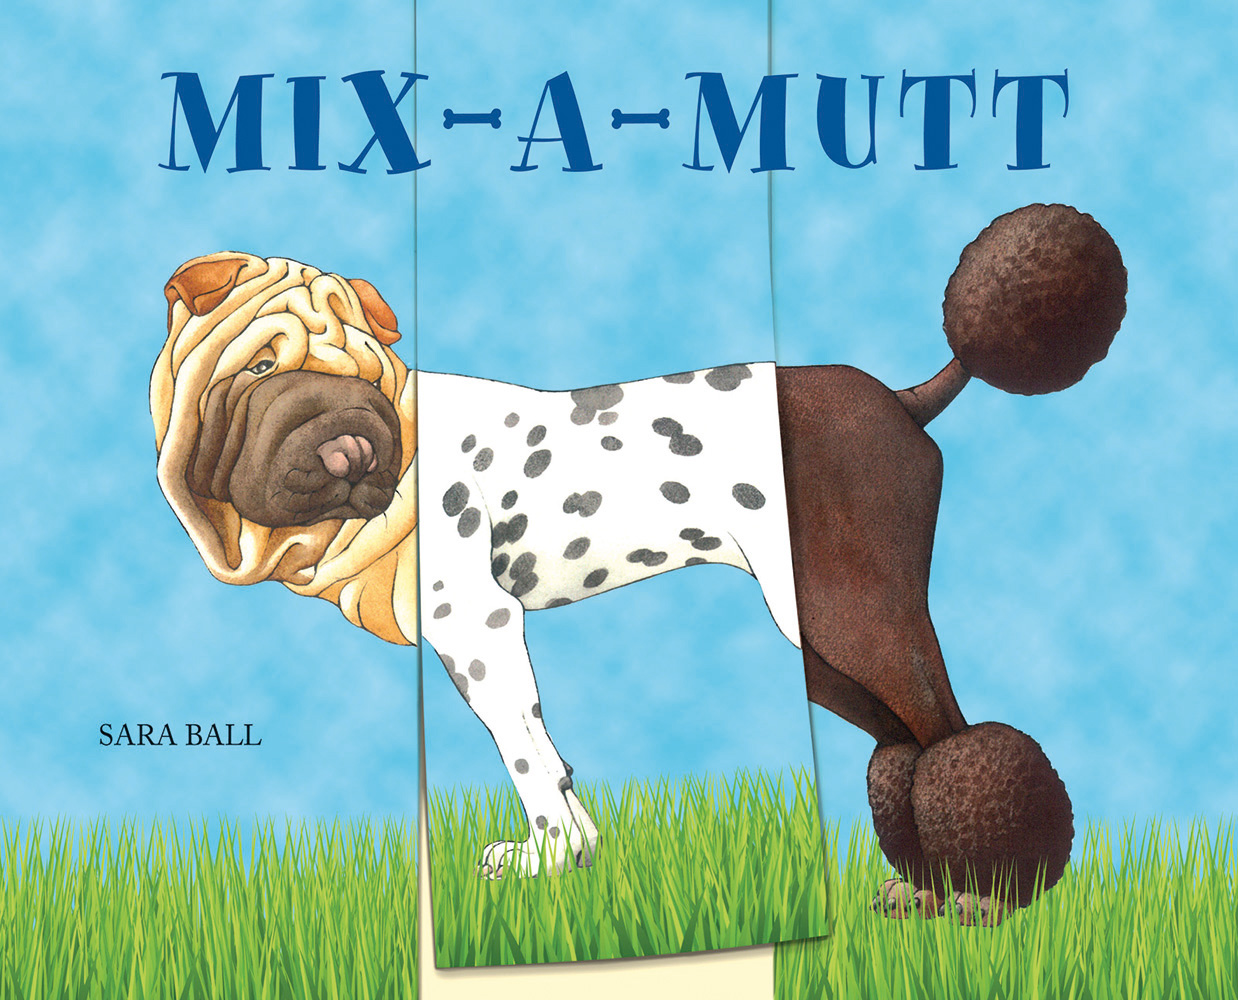 3 sections, head of Shar-Pei body of Dalmatian and tail of poodle, MIX-A-MUTT SARA BALL in blue and black font above and below.